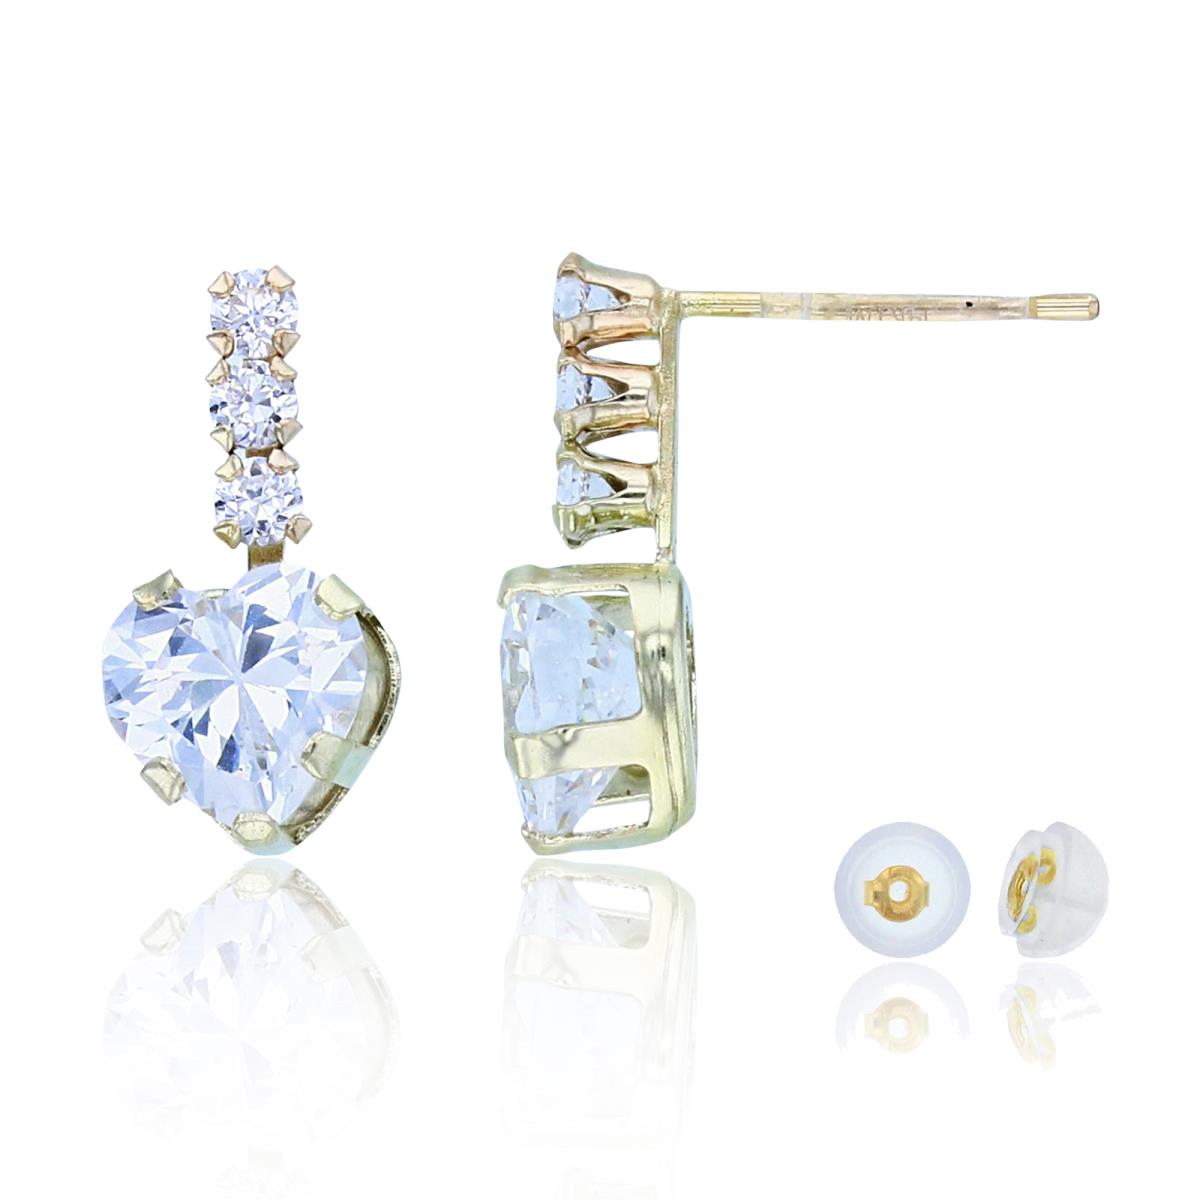 14K Yellow Gold 6mm HS & 2mm Rnd CZ Stud Earrings with Silicon Backs